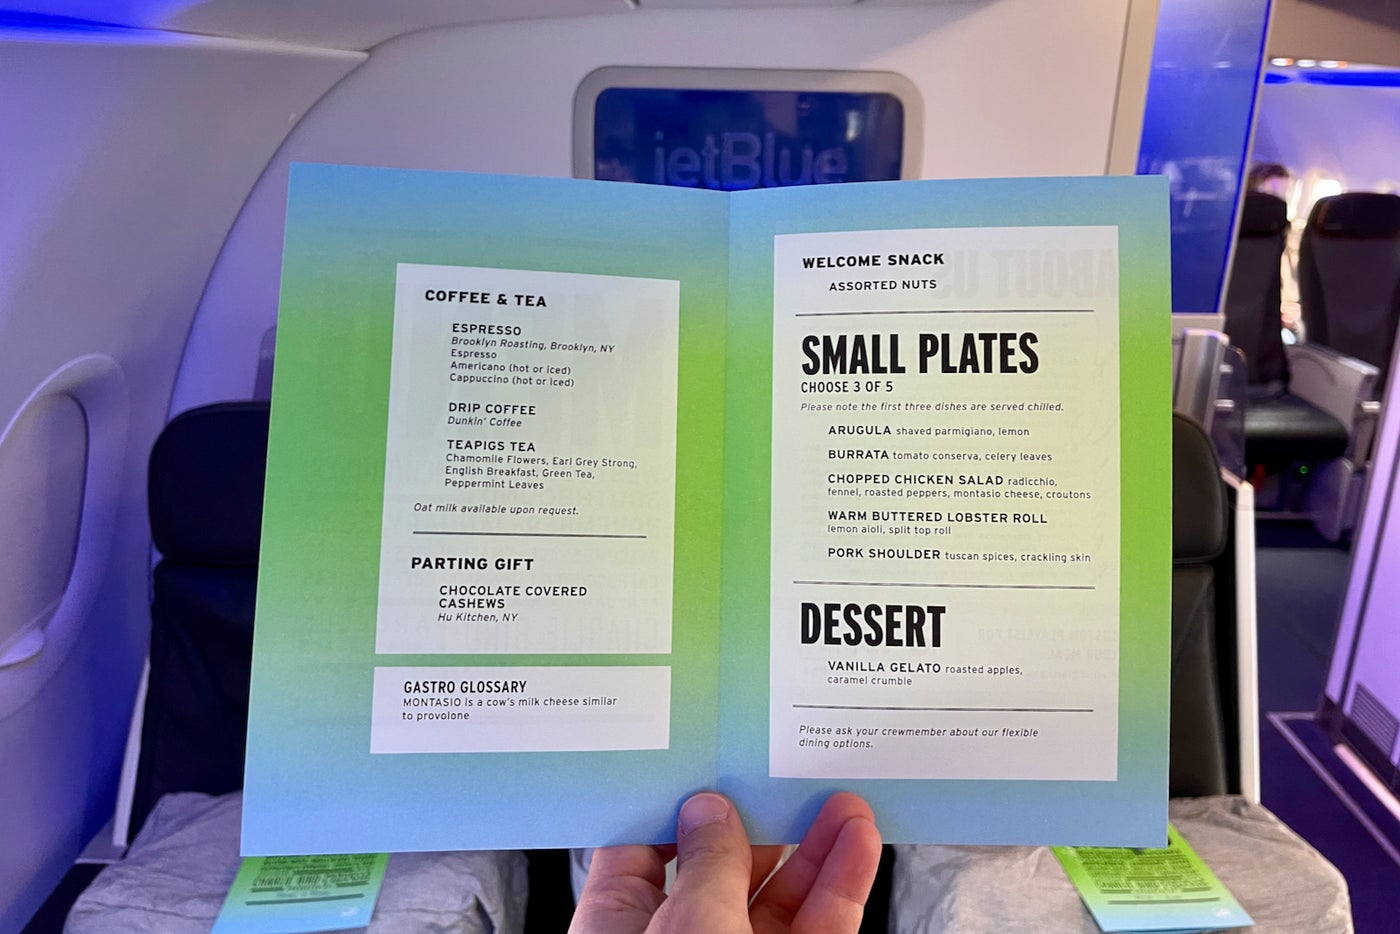 JetBlue's refreshed Mint shines with improved food and amenities